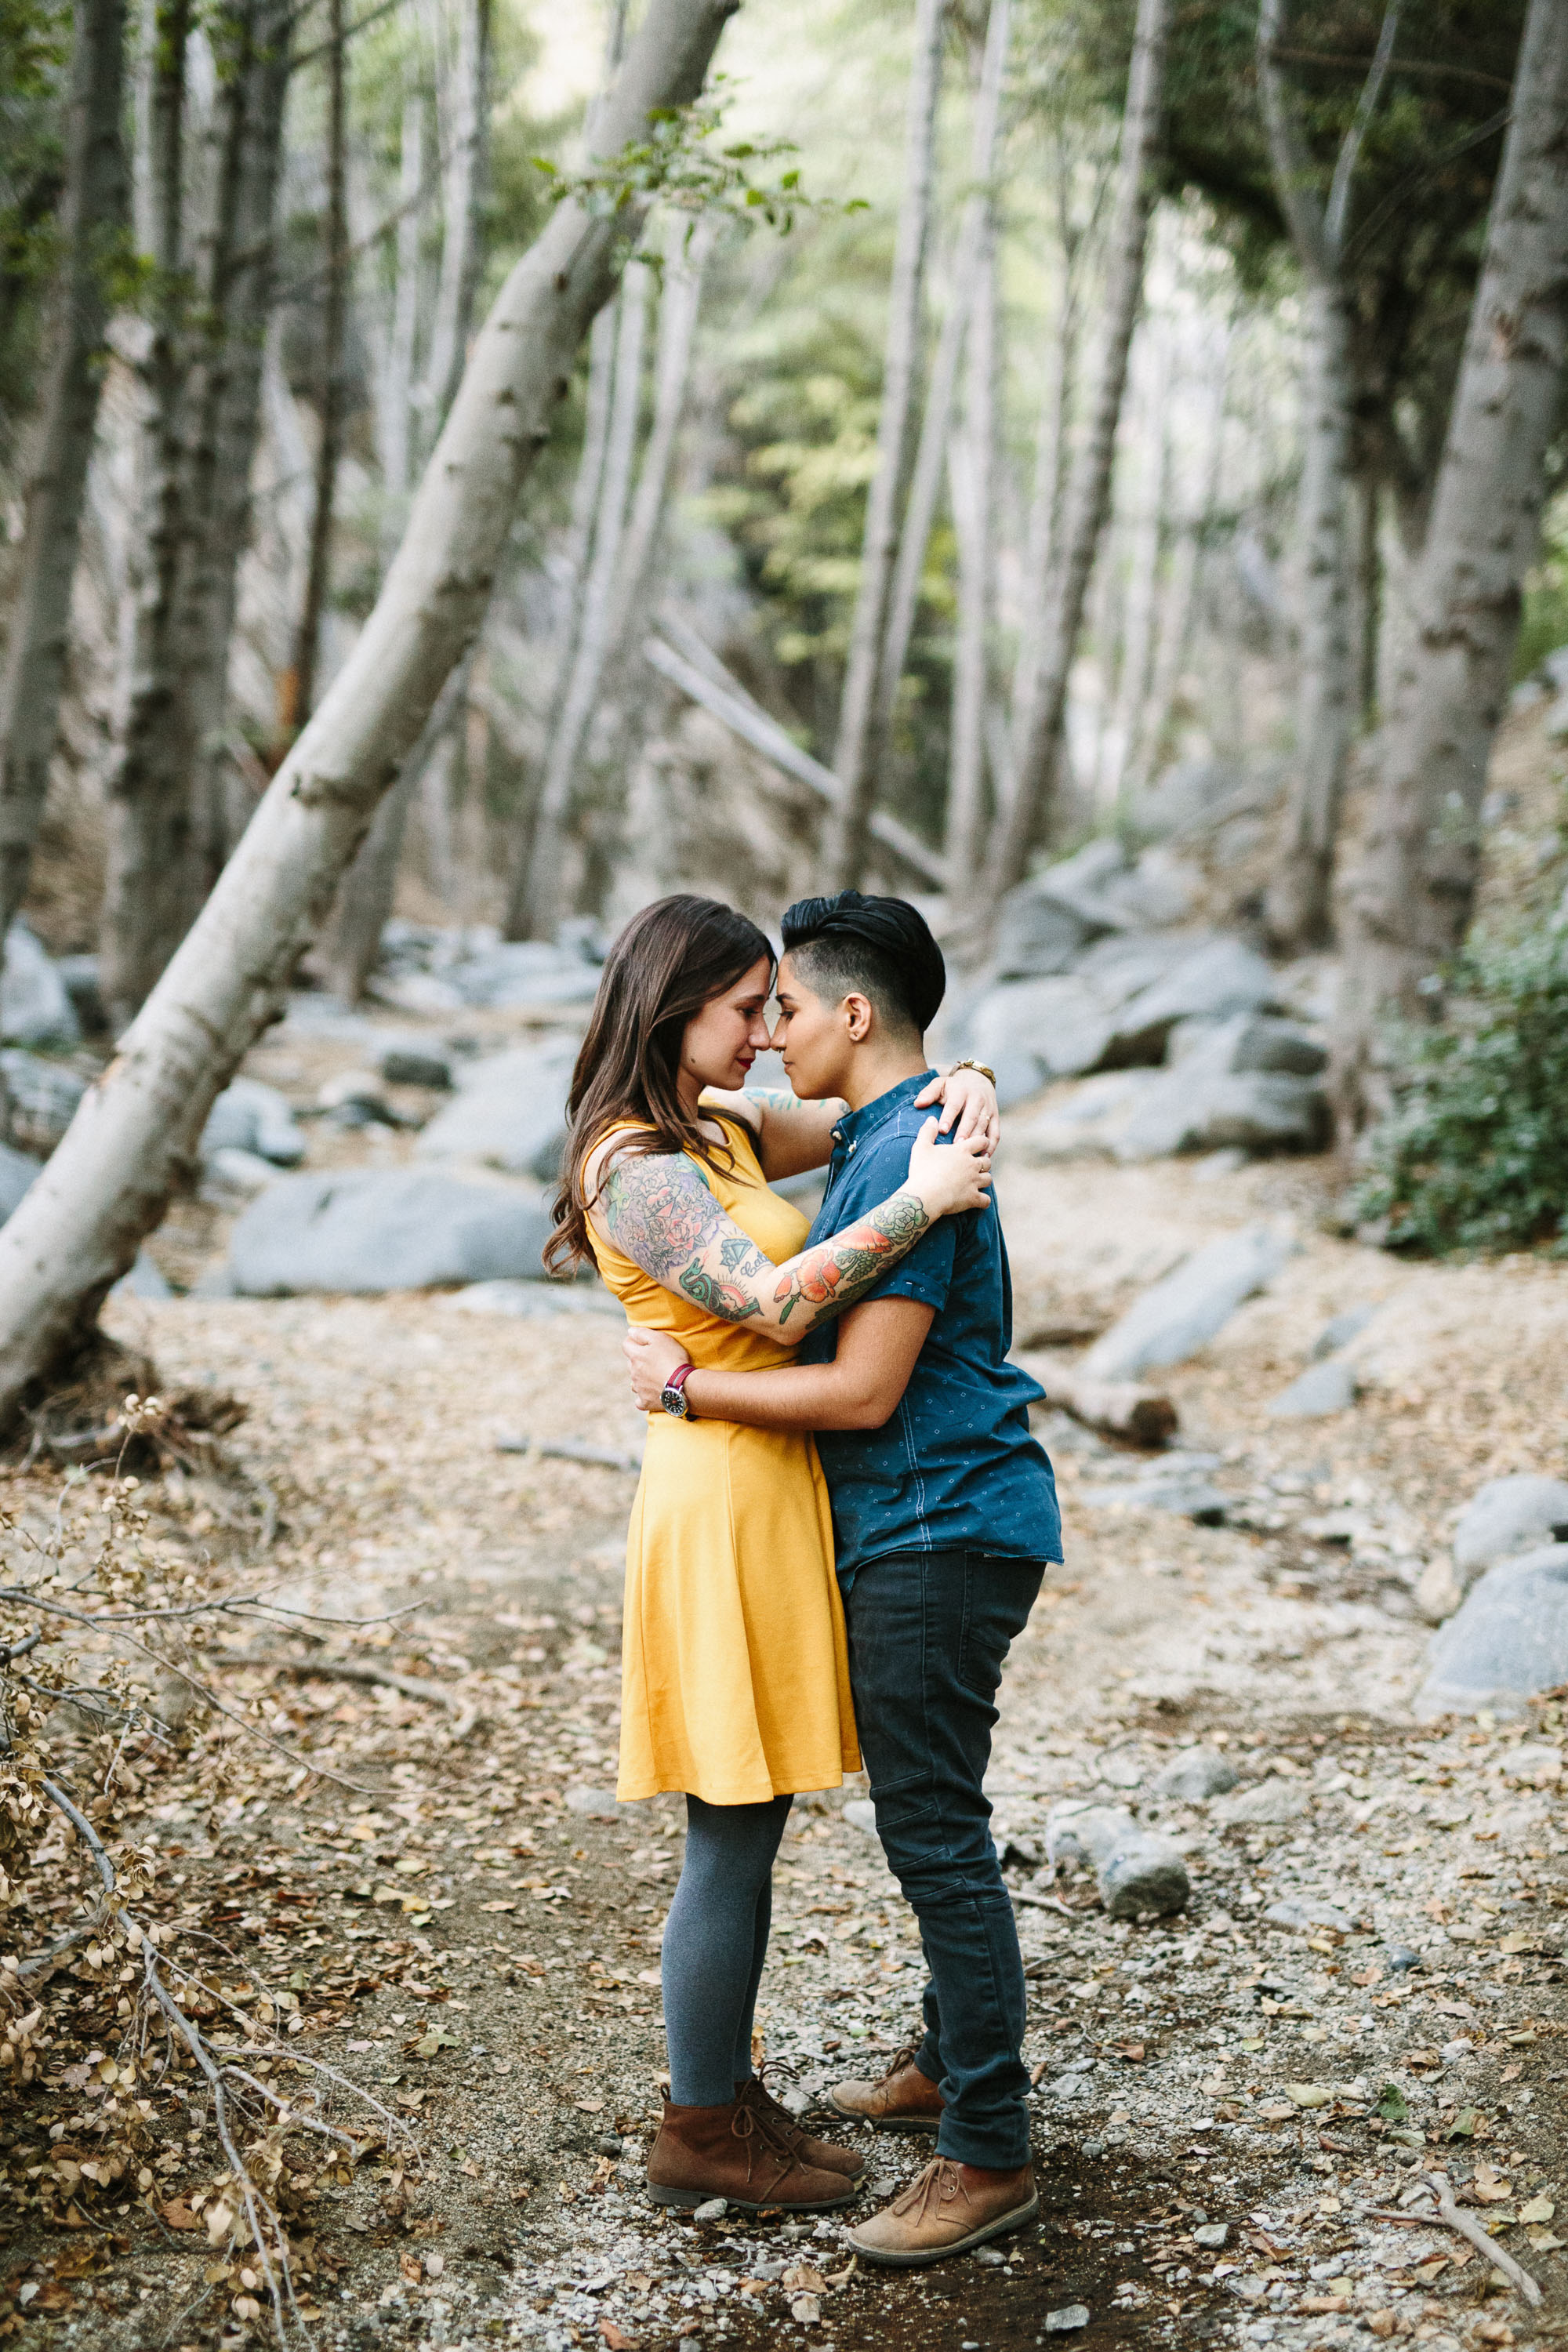 www-marycostaphotography-com-angeles-national-forest-engagement-0023